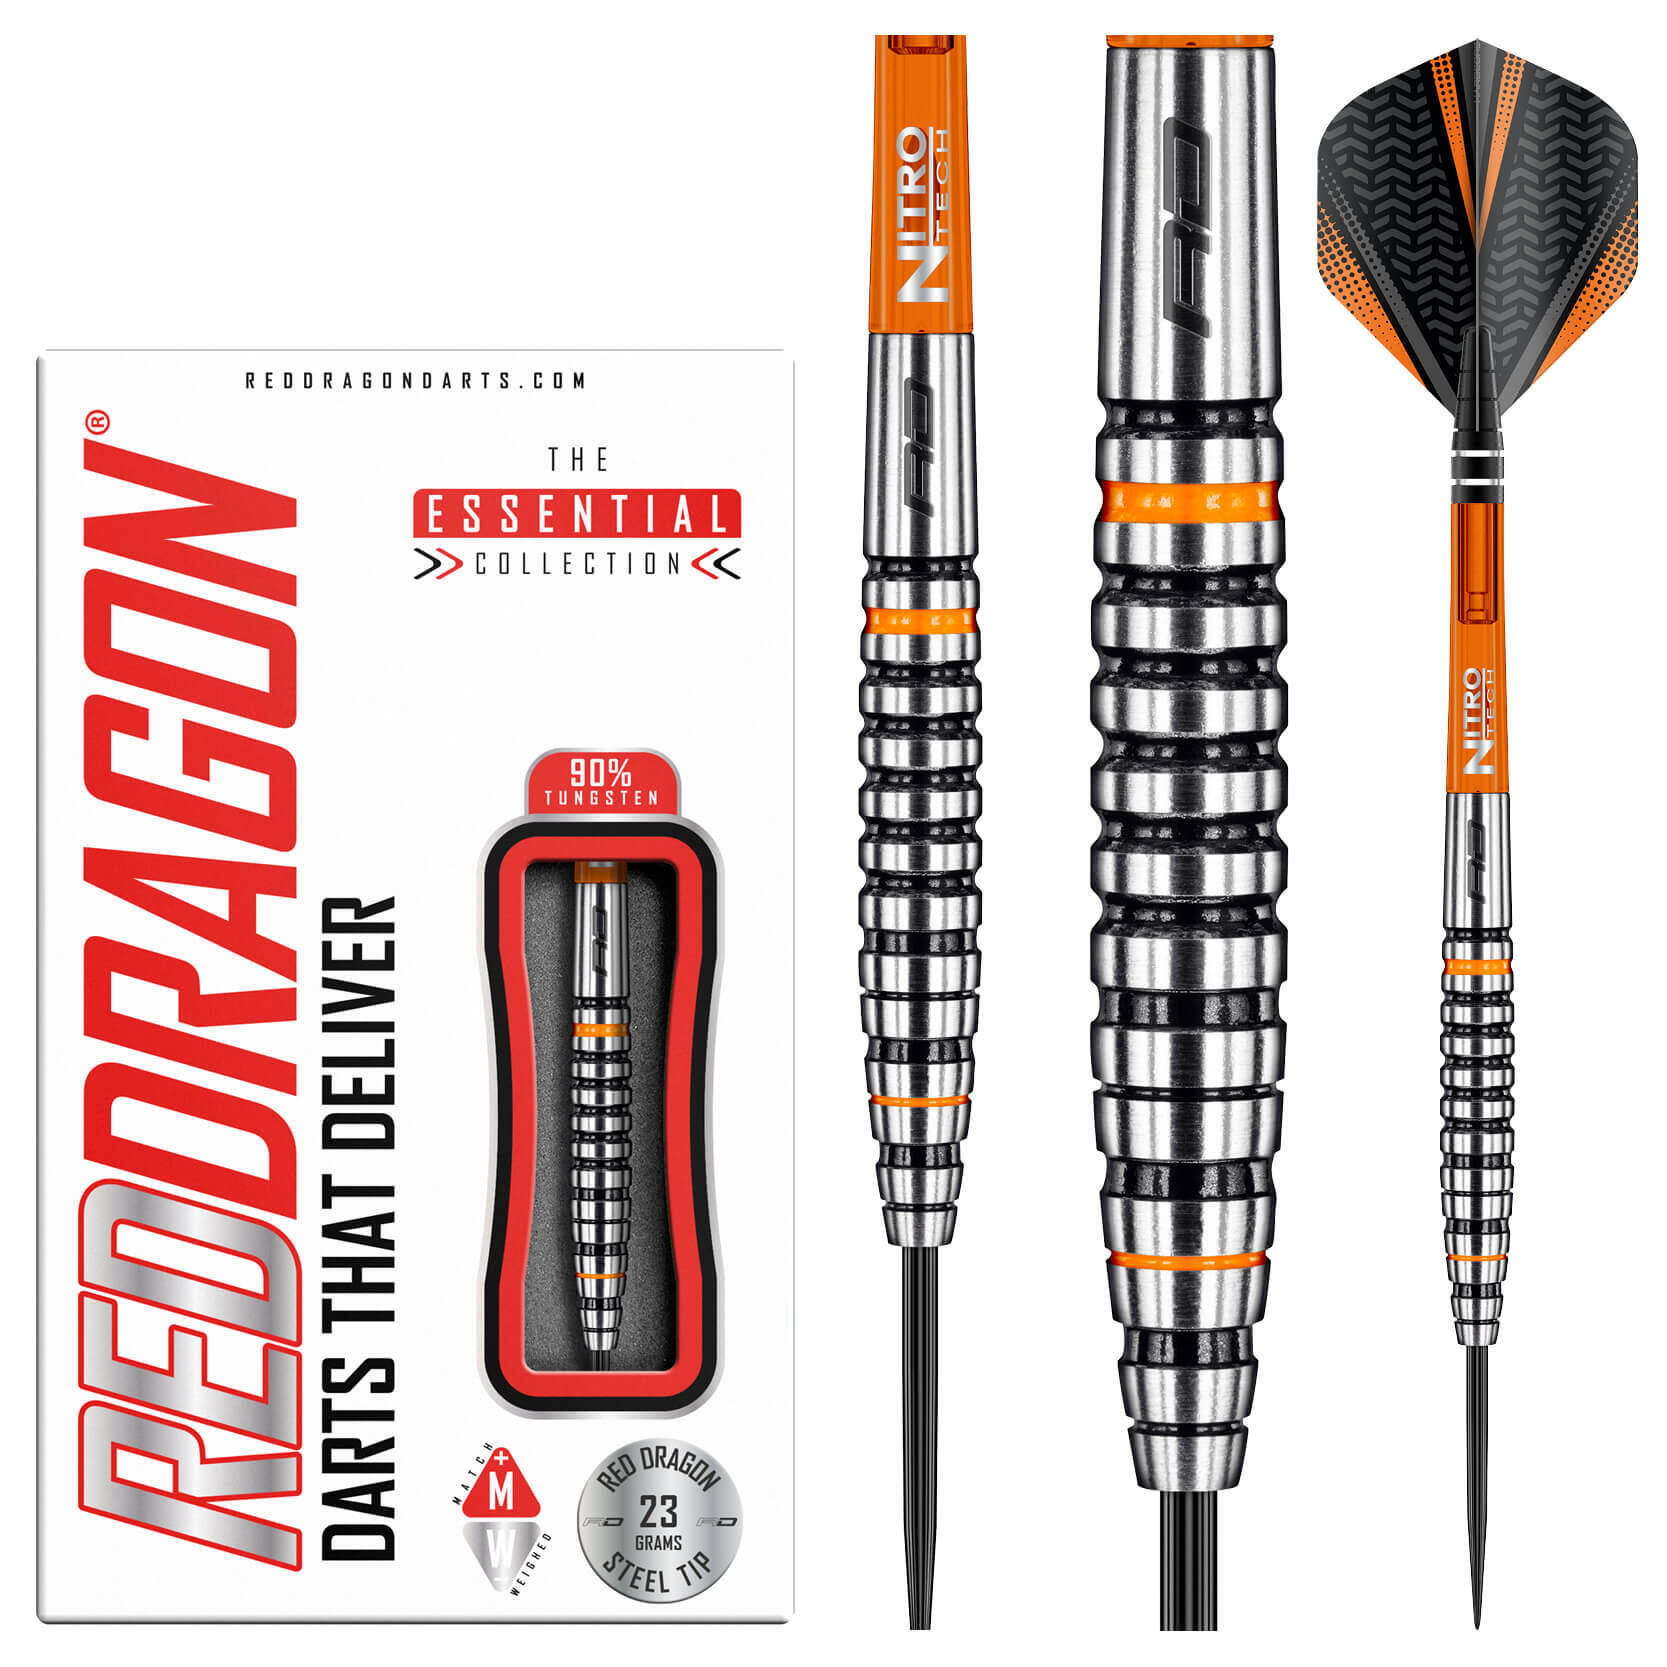 Amberjack 14: 23g Tungsten Darts Set with Flights and Stems 1/5